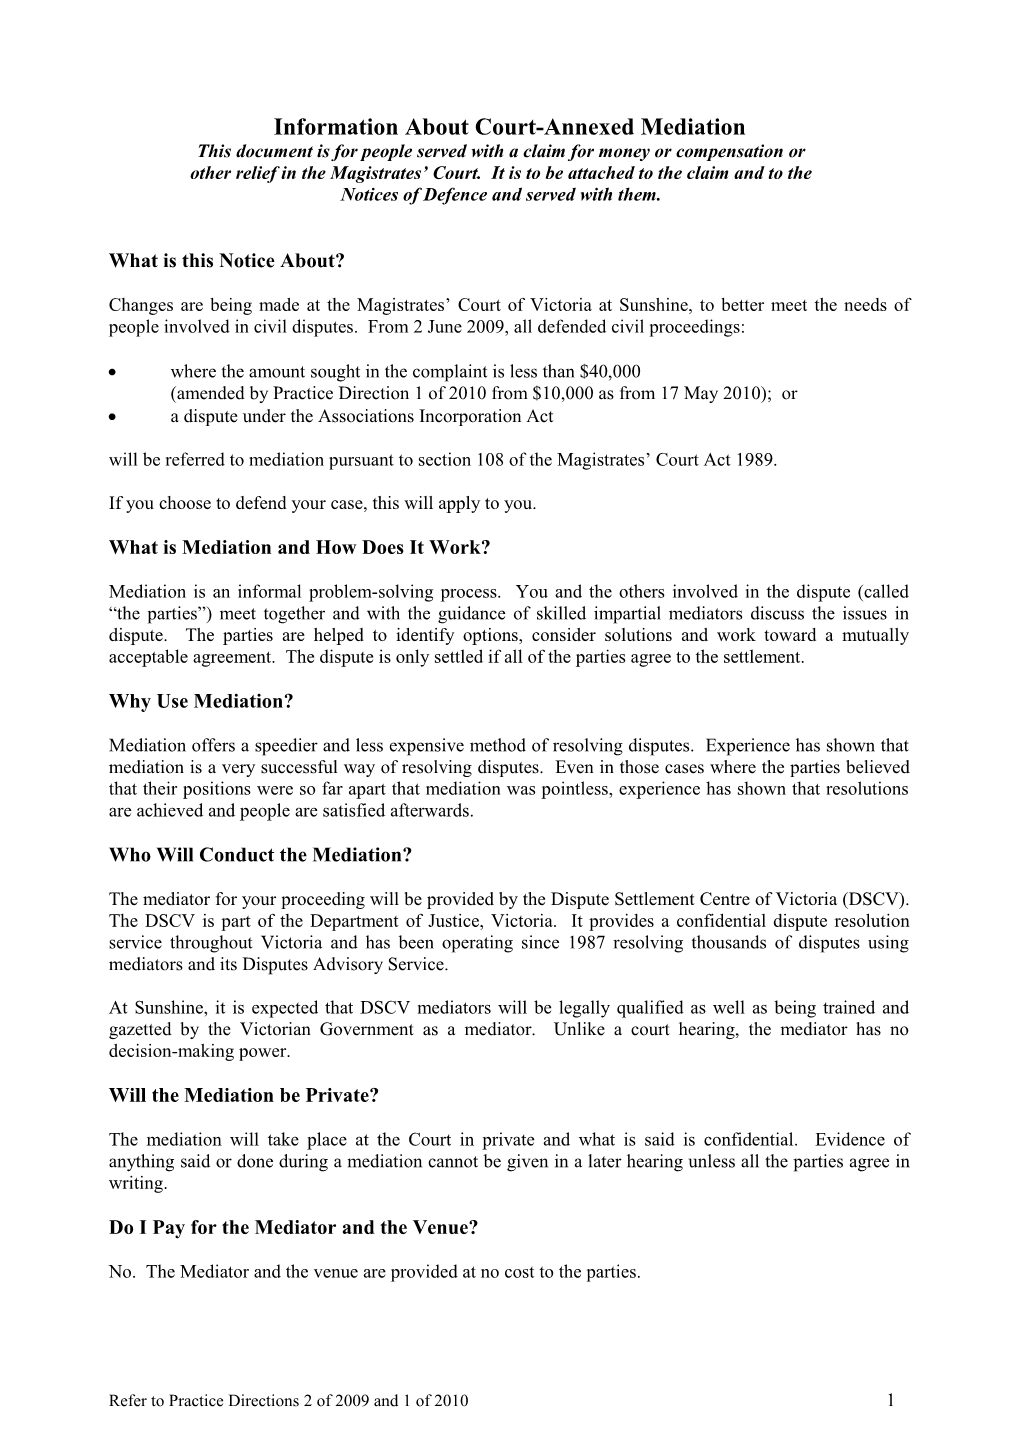 Information About Mediation-Sunshine (Word 61KB - 3 Pages)